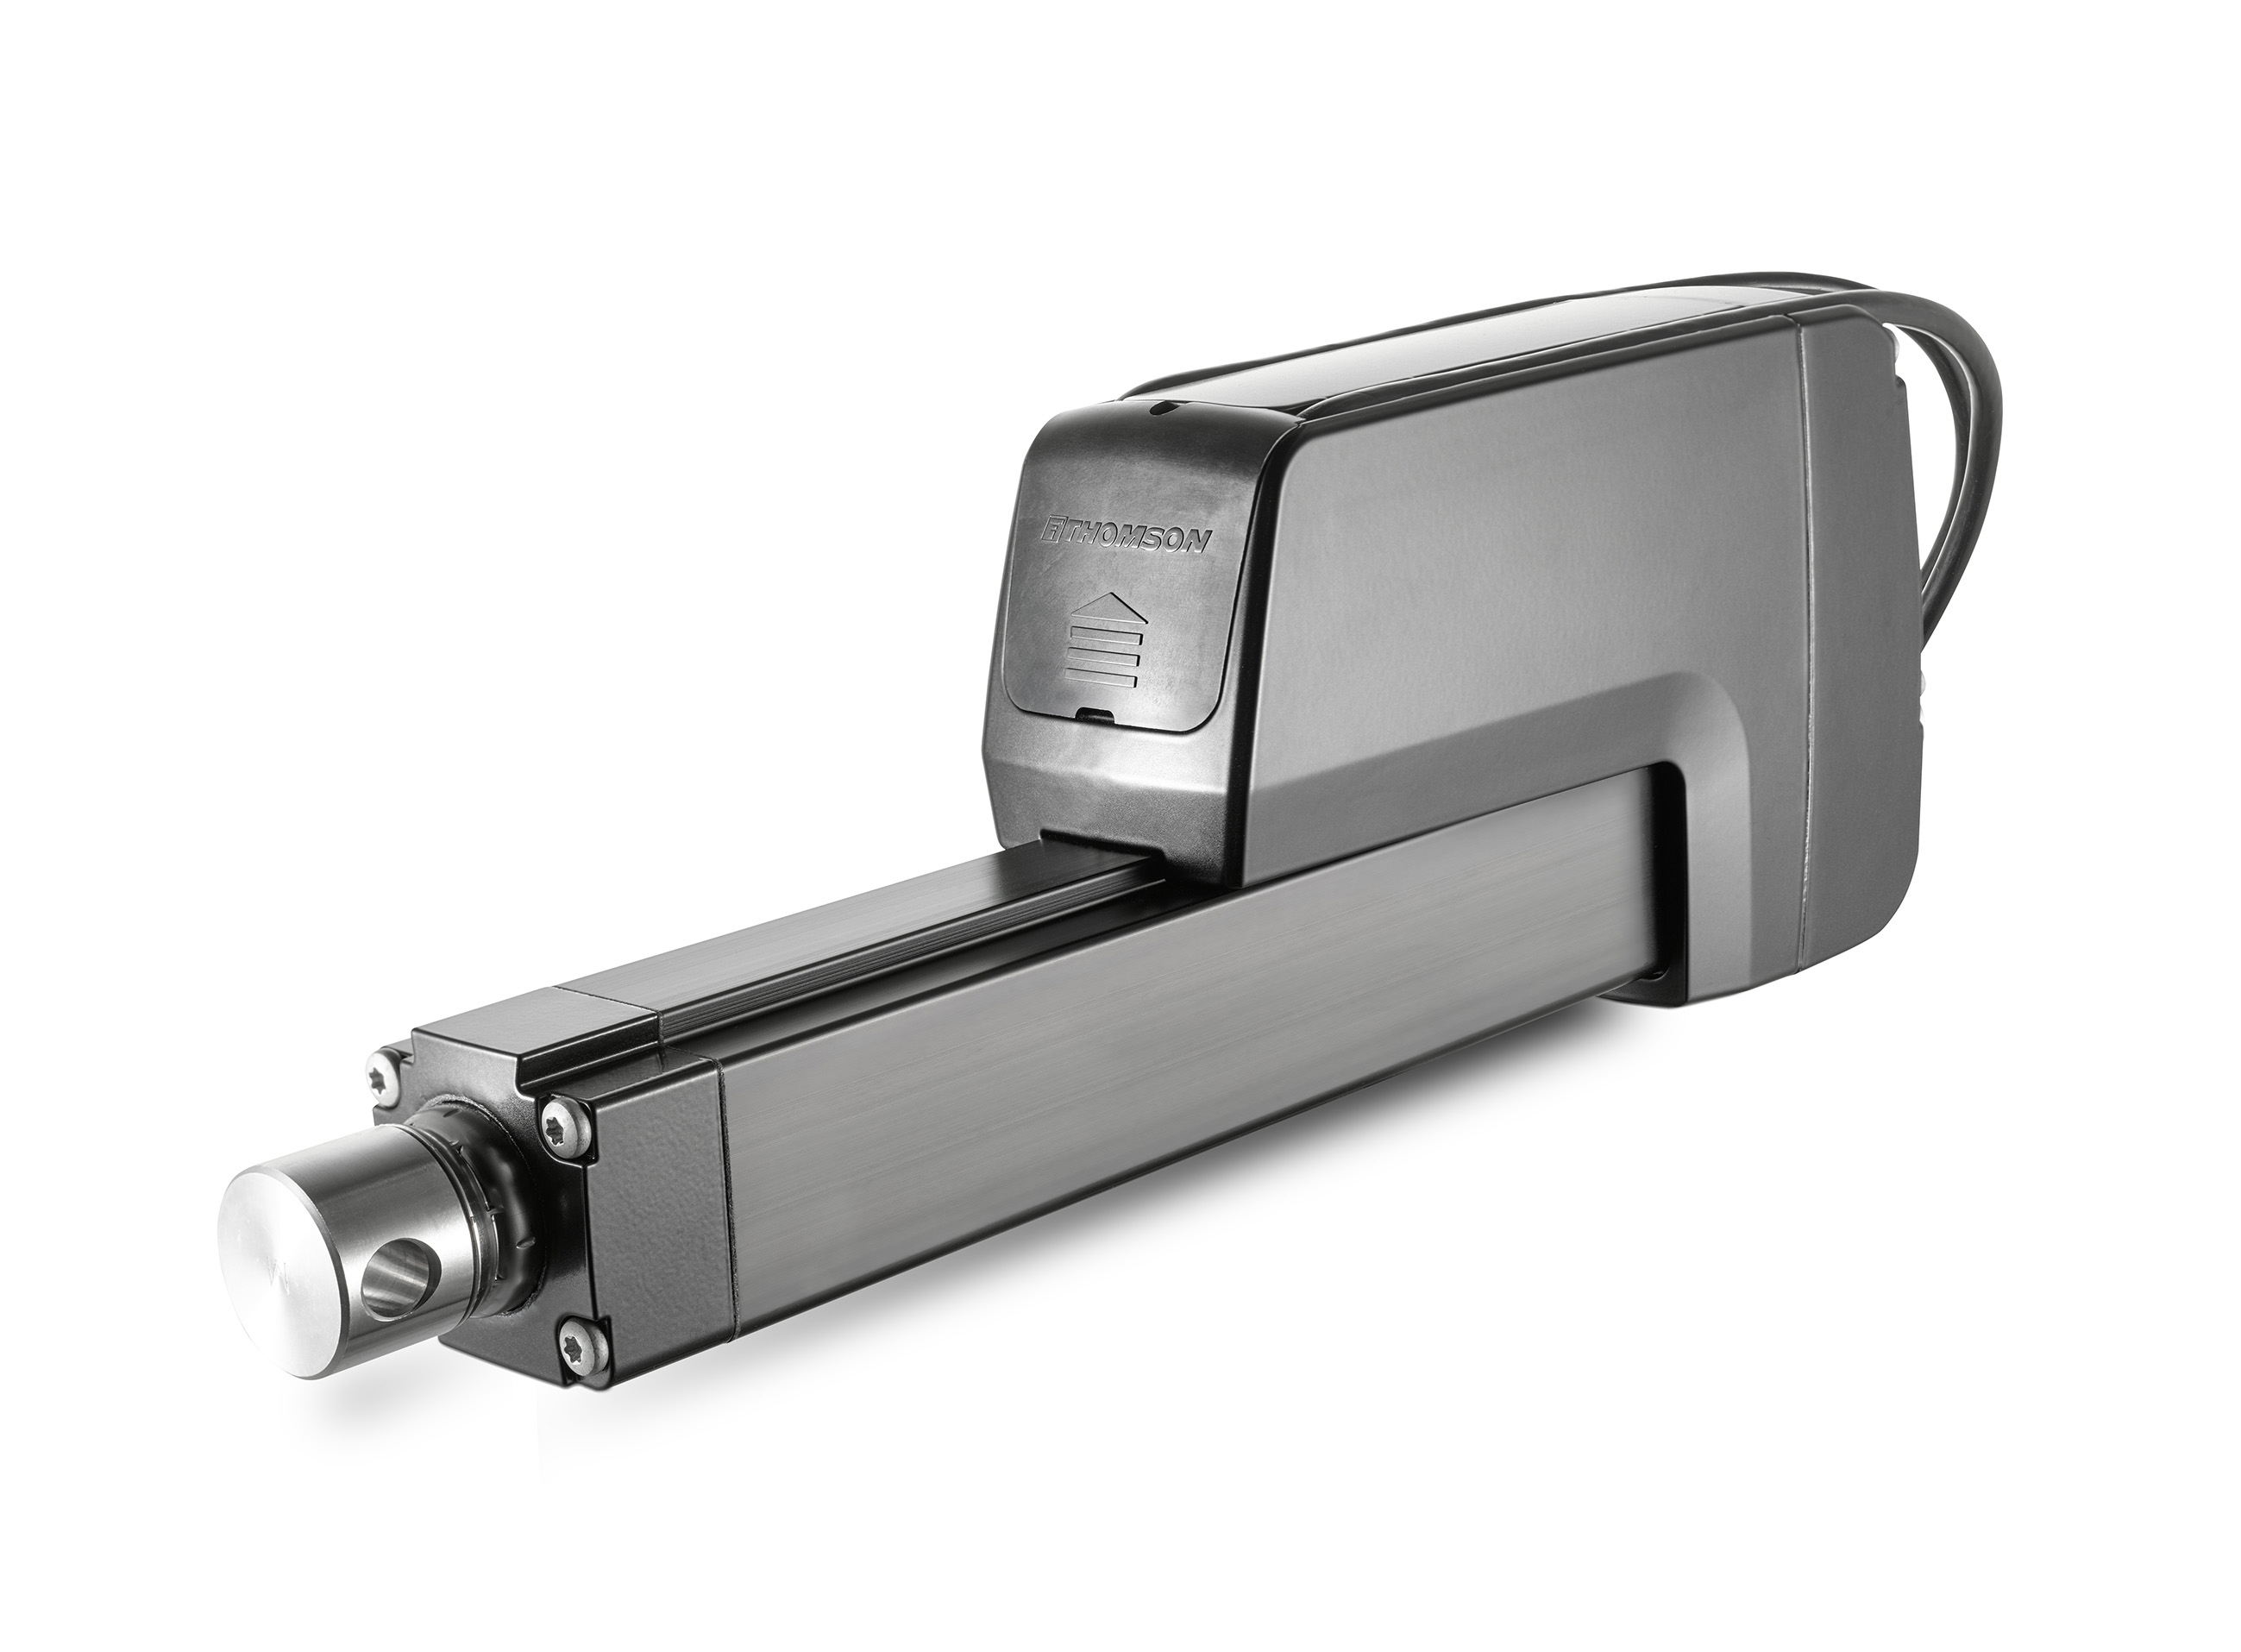 New linear actuator increases duty cycle and lifetime for use in tough environments